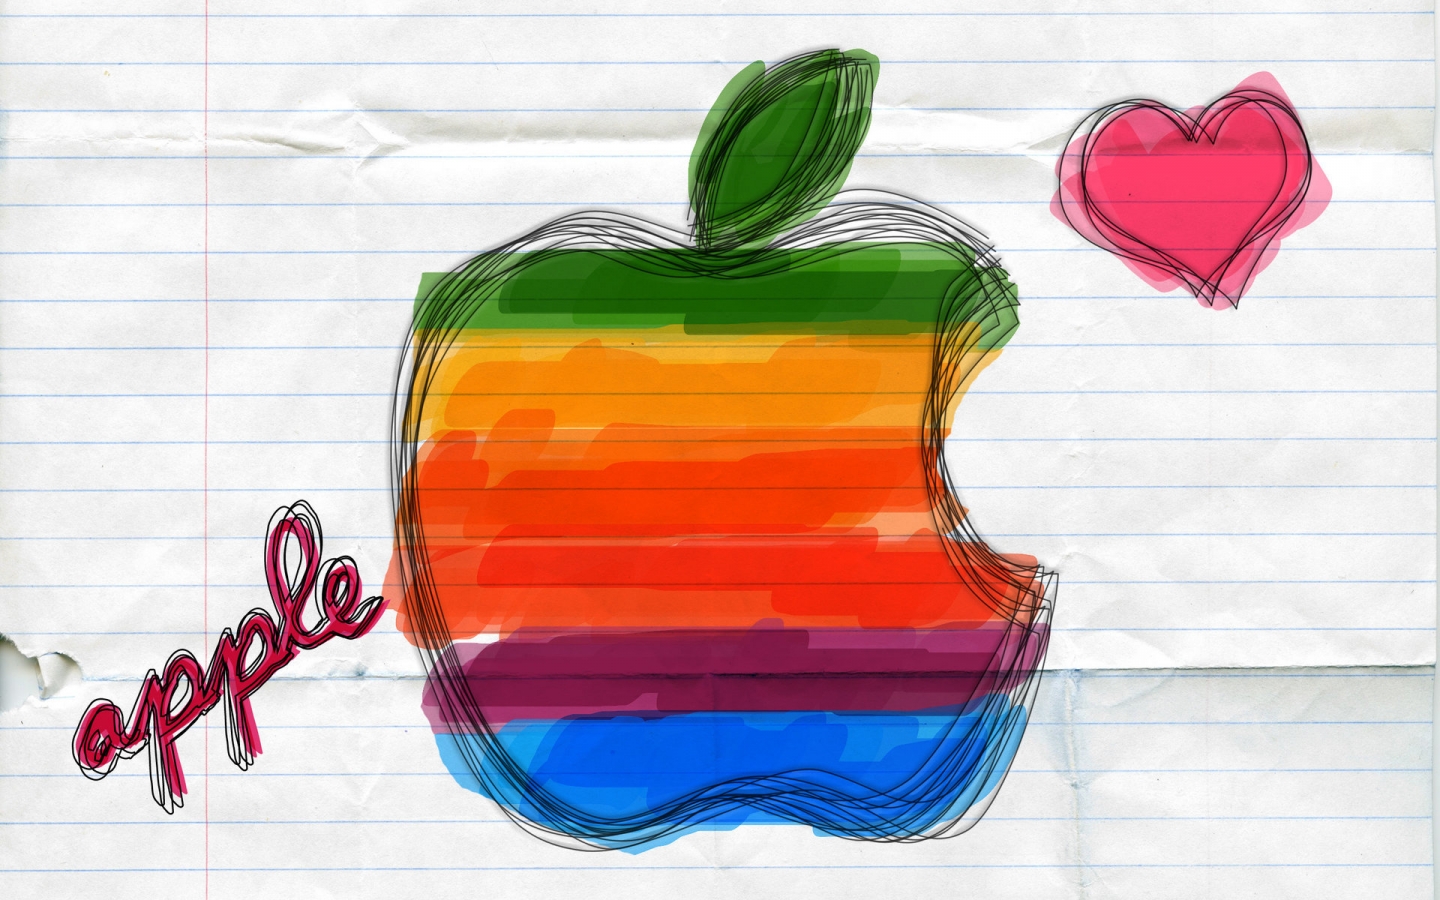 Colourful Apple logo for 1440 x 900 widescreen resolution